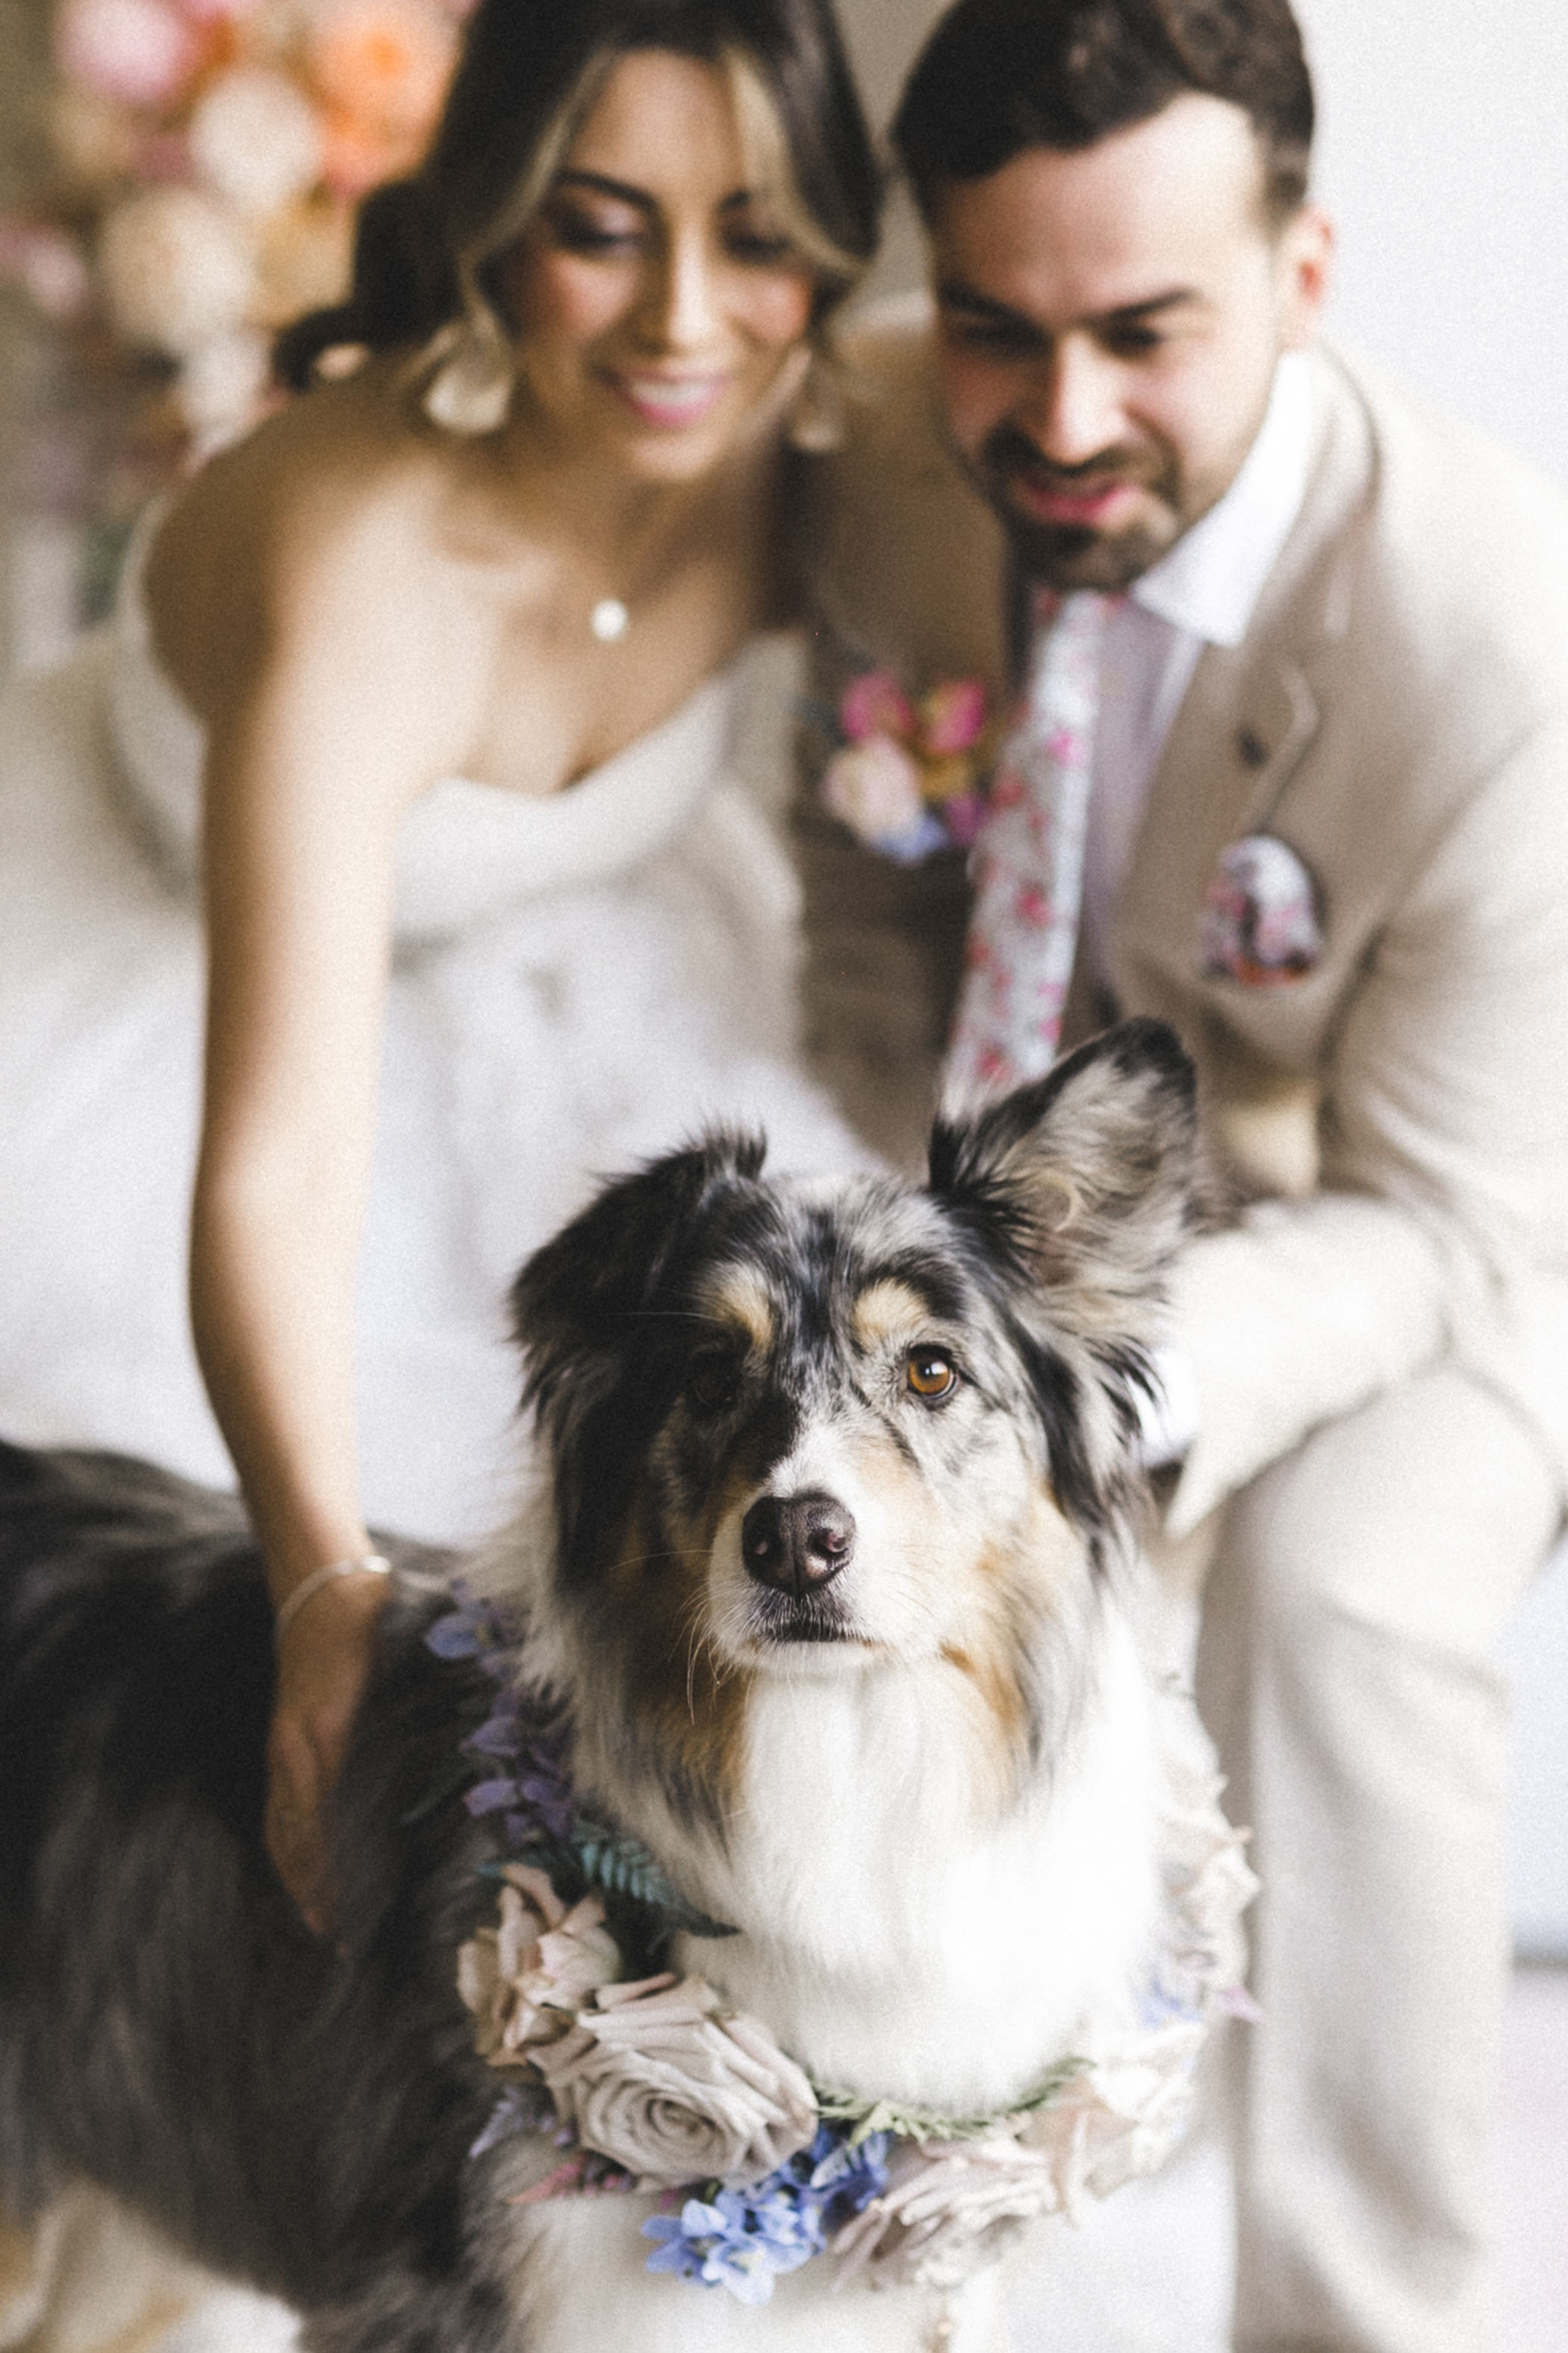 bride and groom petting their dog on their wedding day